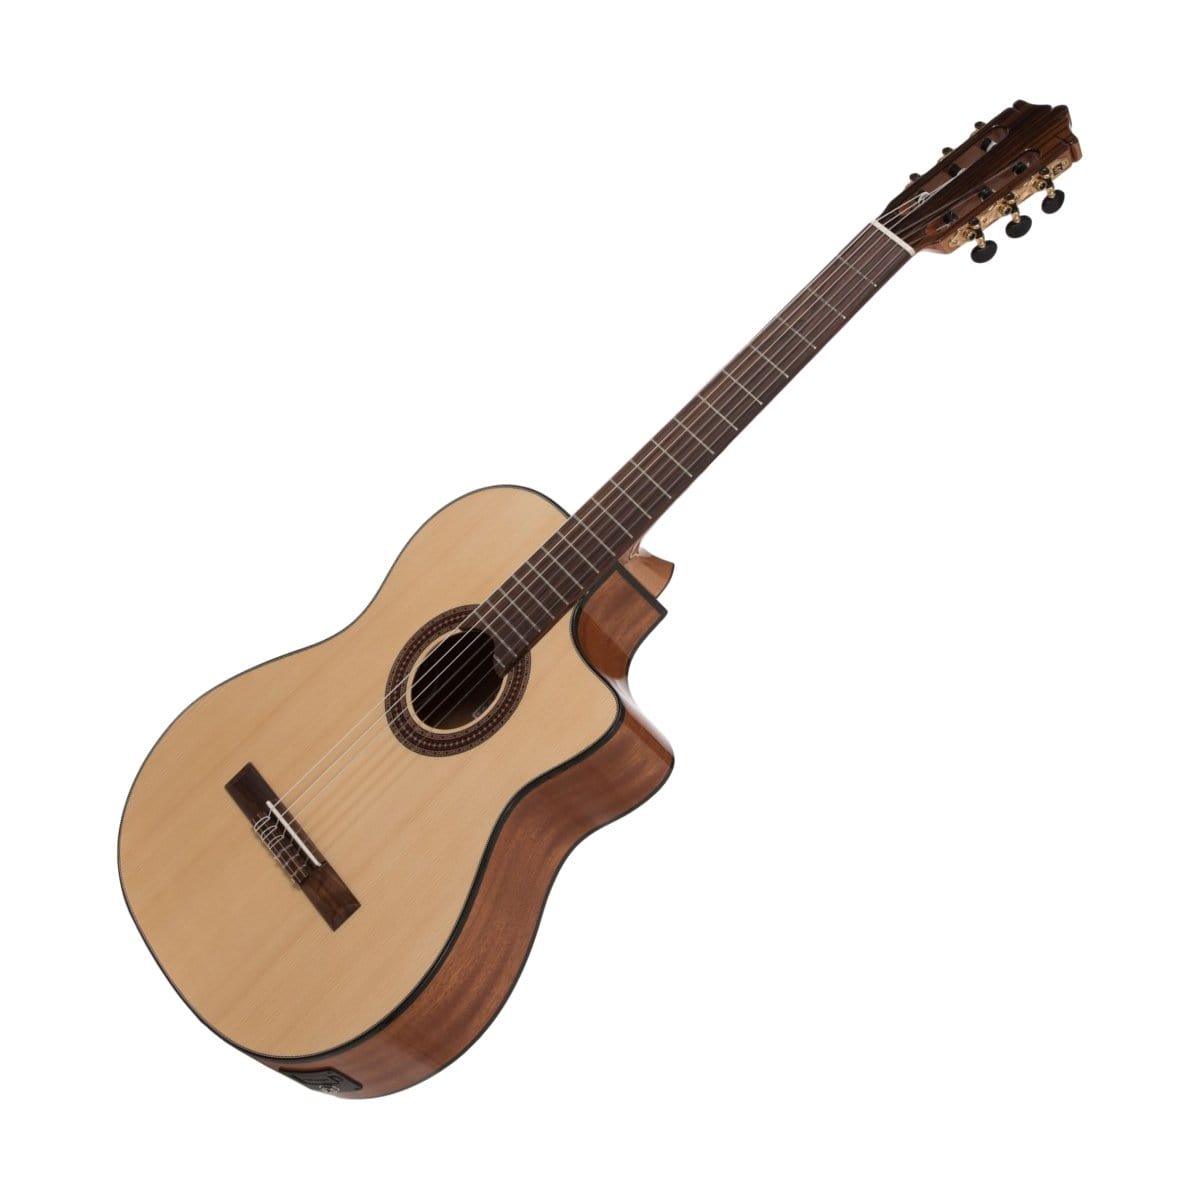 Katoh Guitar Katoh Classical Guitar Solid Spruce Top with Pickup MCG40SEQ - Byron Music